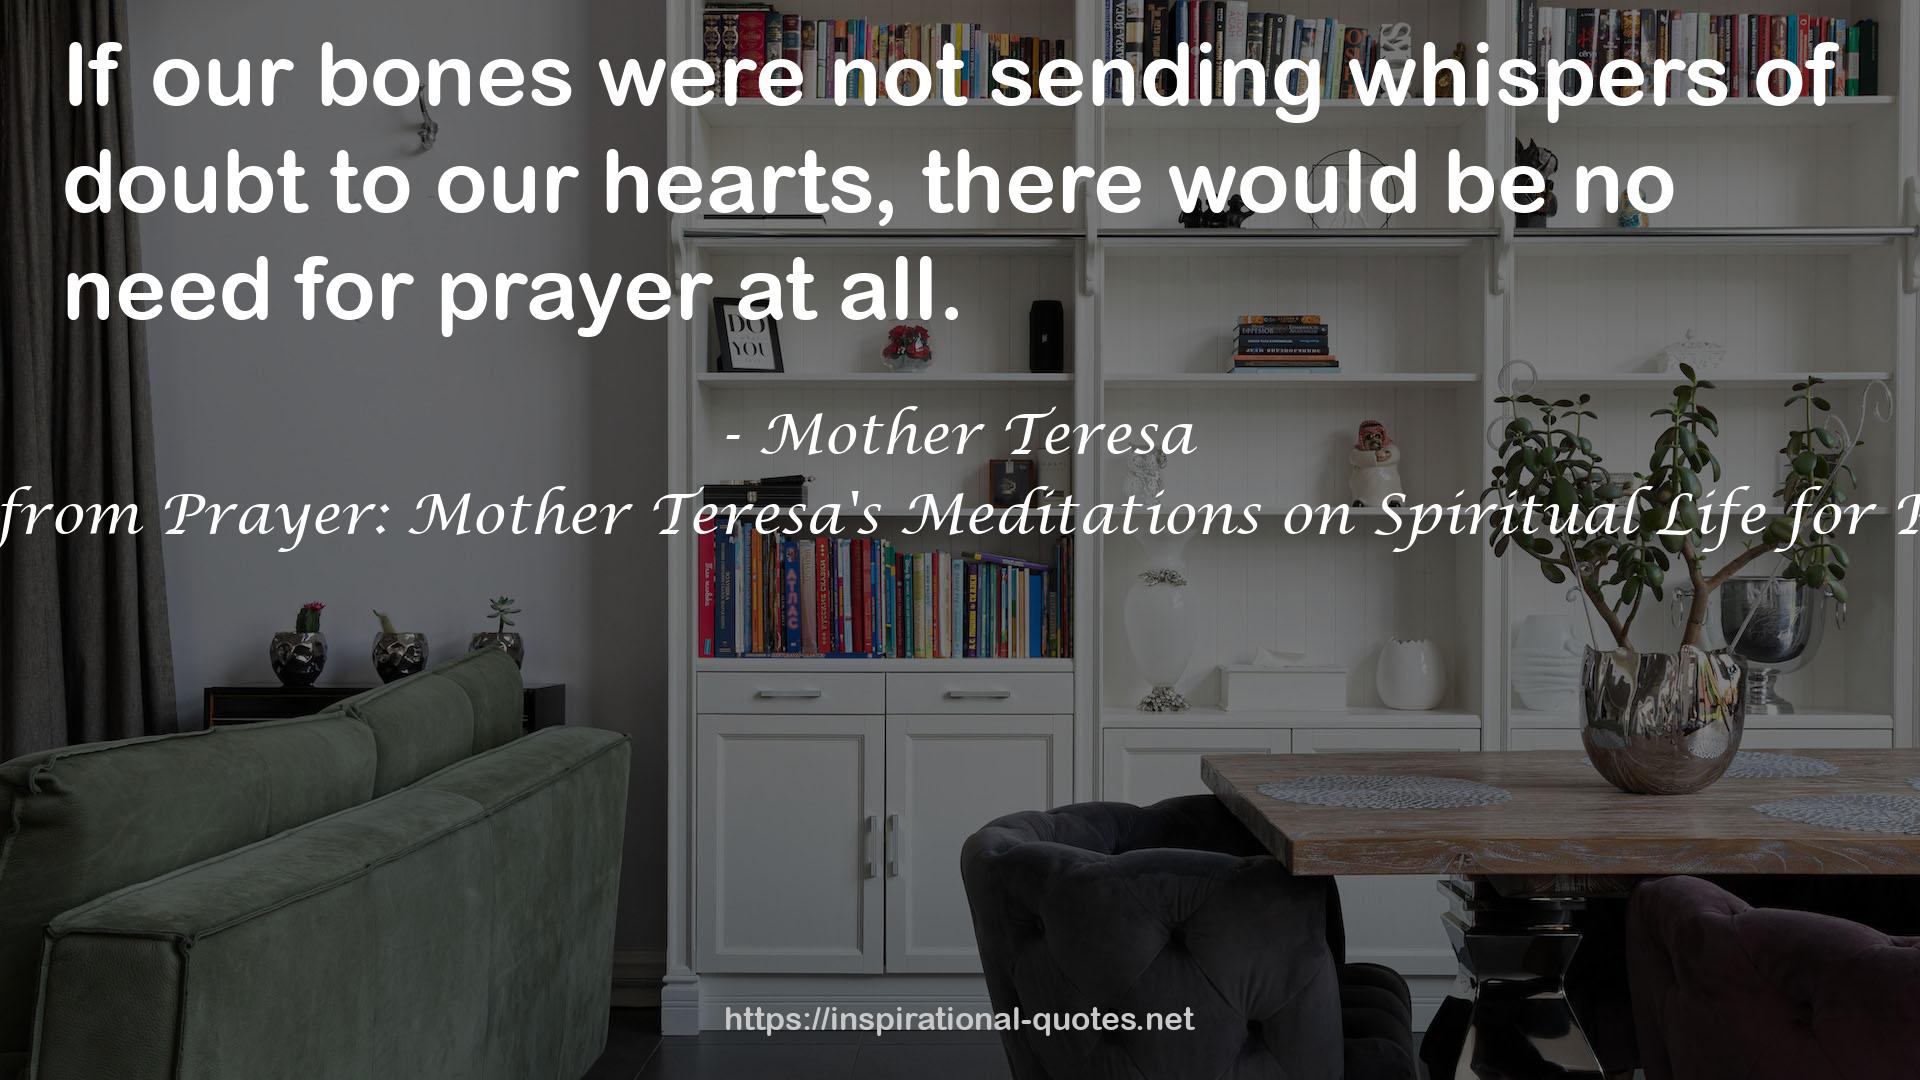 Everything Starts from Prayer: Mother Teresa's Meditations on Spiritual Life for People of All Faiths QUOTES